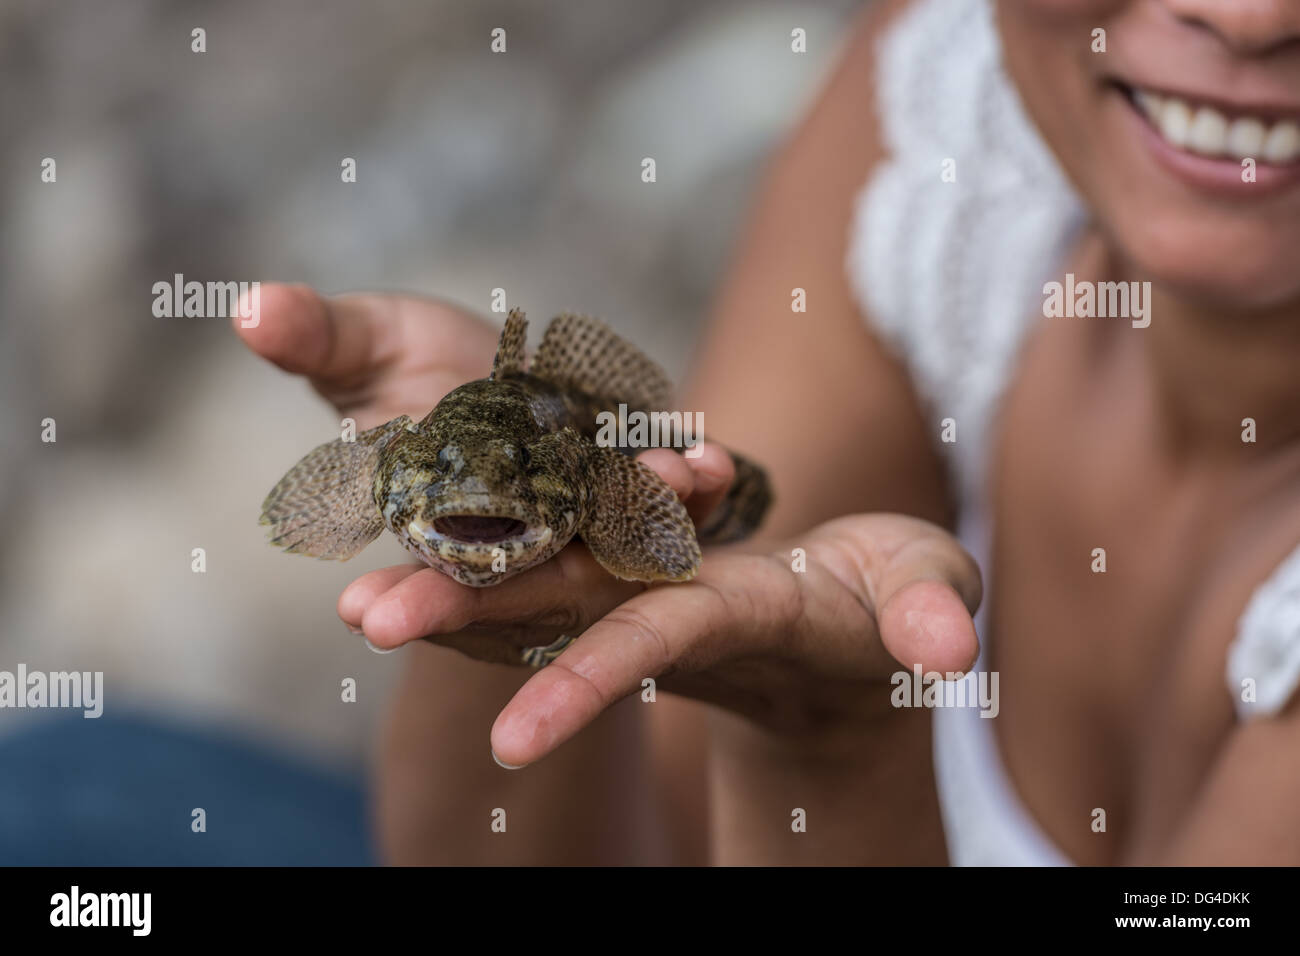 Gobius cobitis or Giant Goby fish carefully displayed by the happy and proud lady who just caught it. Stock Photo